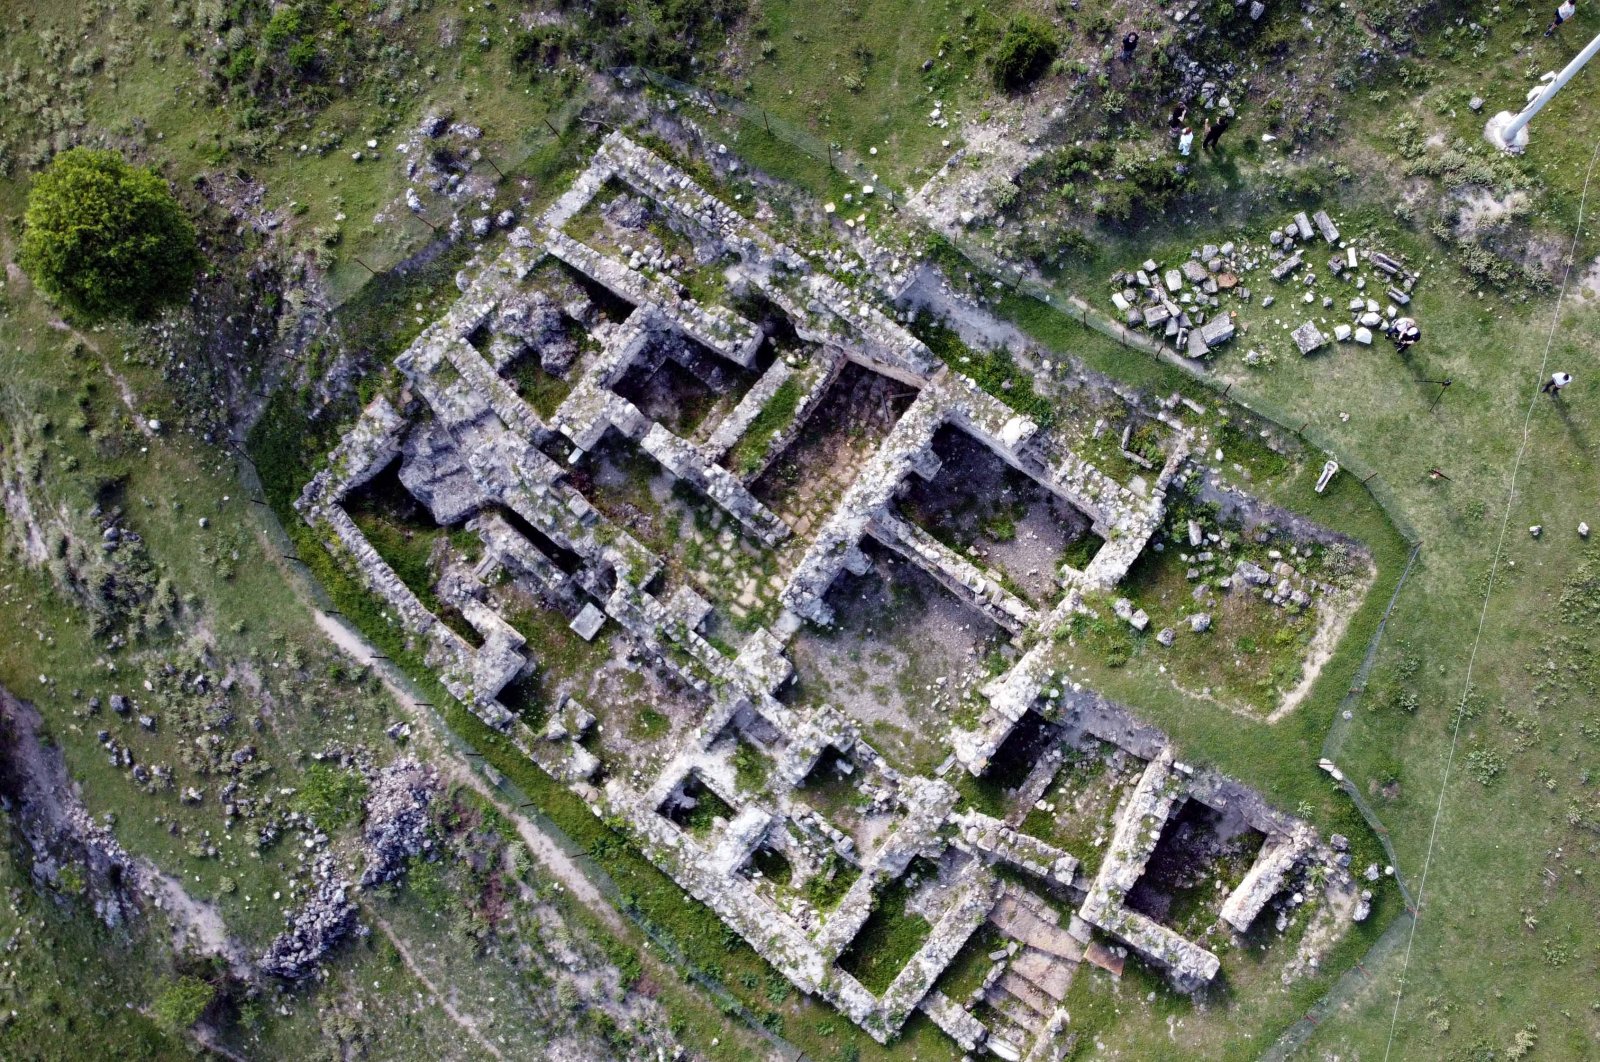 Ancient city of Hadrianopolis in Black Sea region reinvigorated by visits |  Daily Sabah